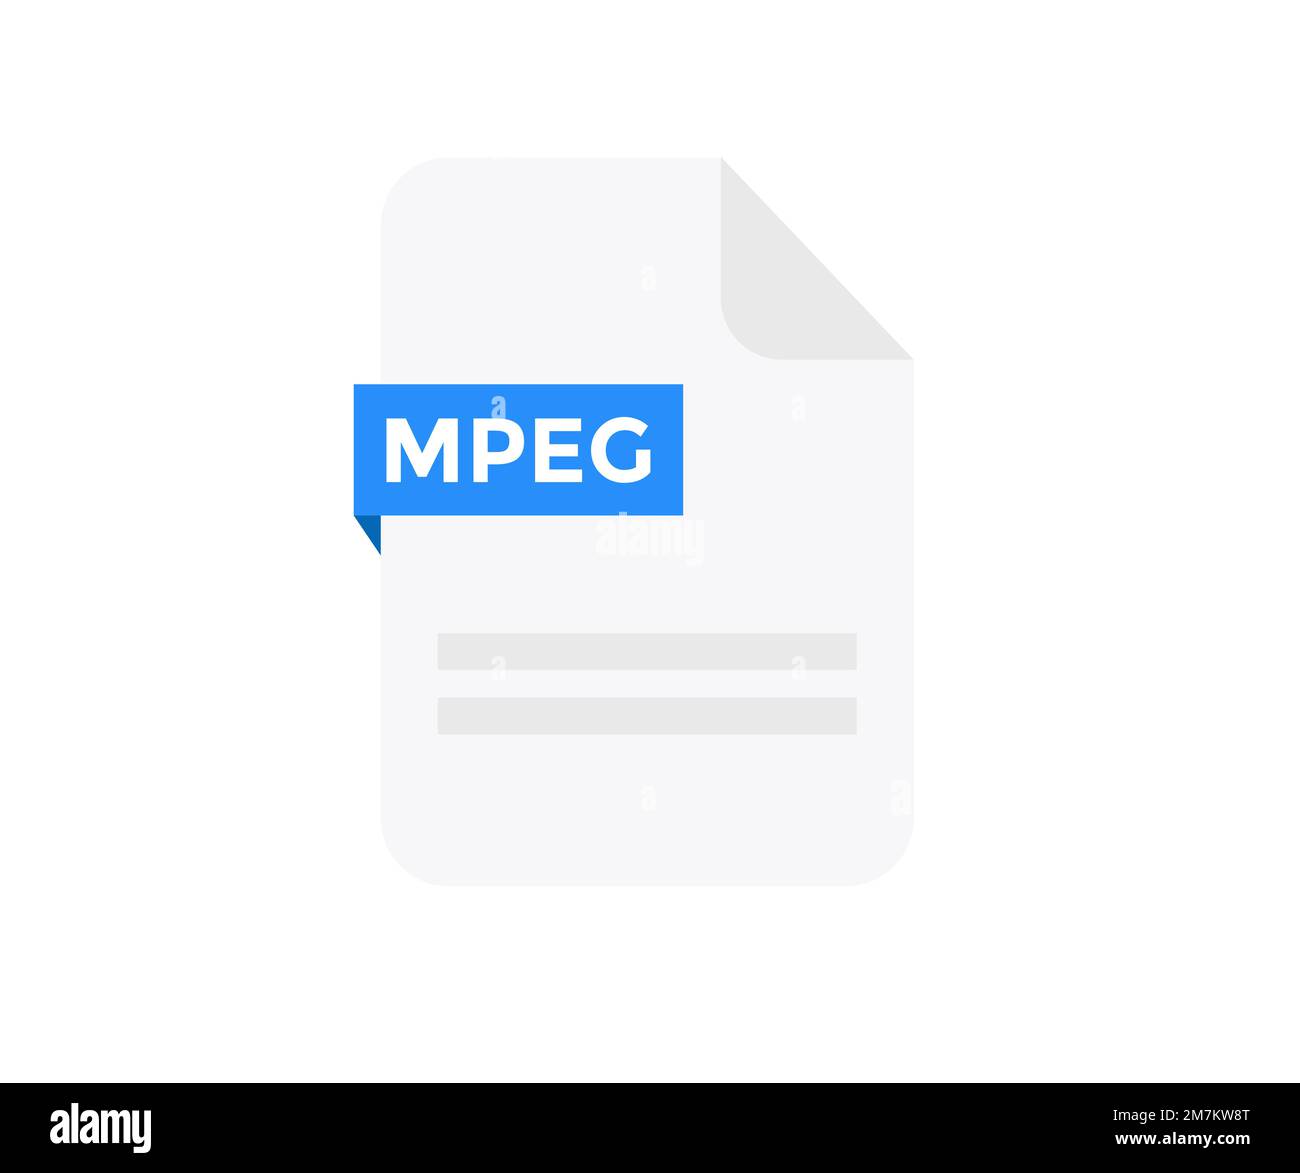 File format MPEG logo design. Document file icon, internet, extension, sign, type, presentation, graphic, application. Element for applications. Stock Vector